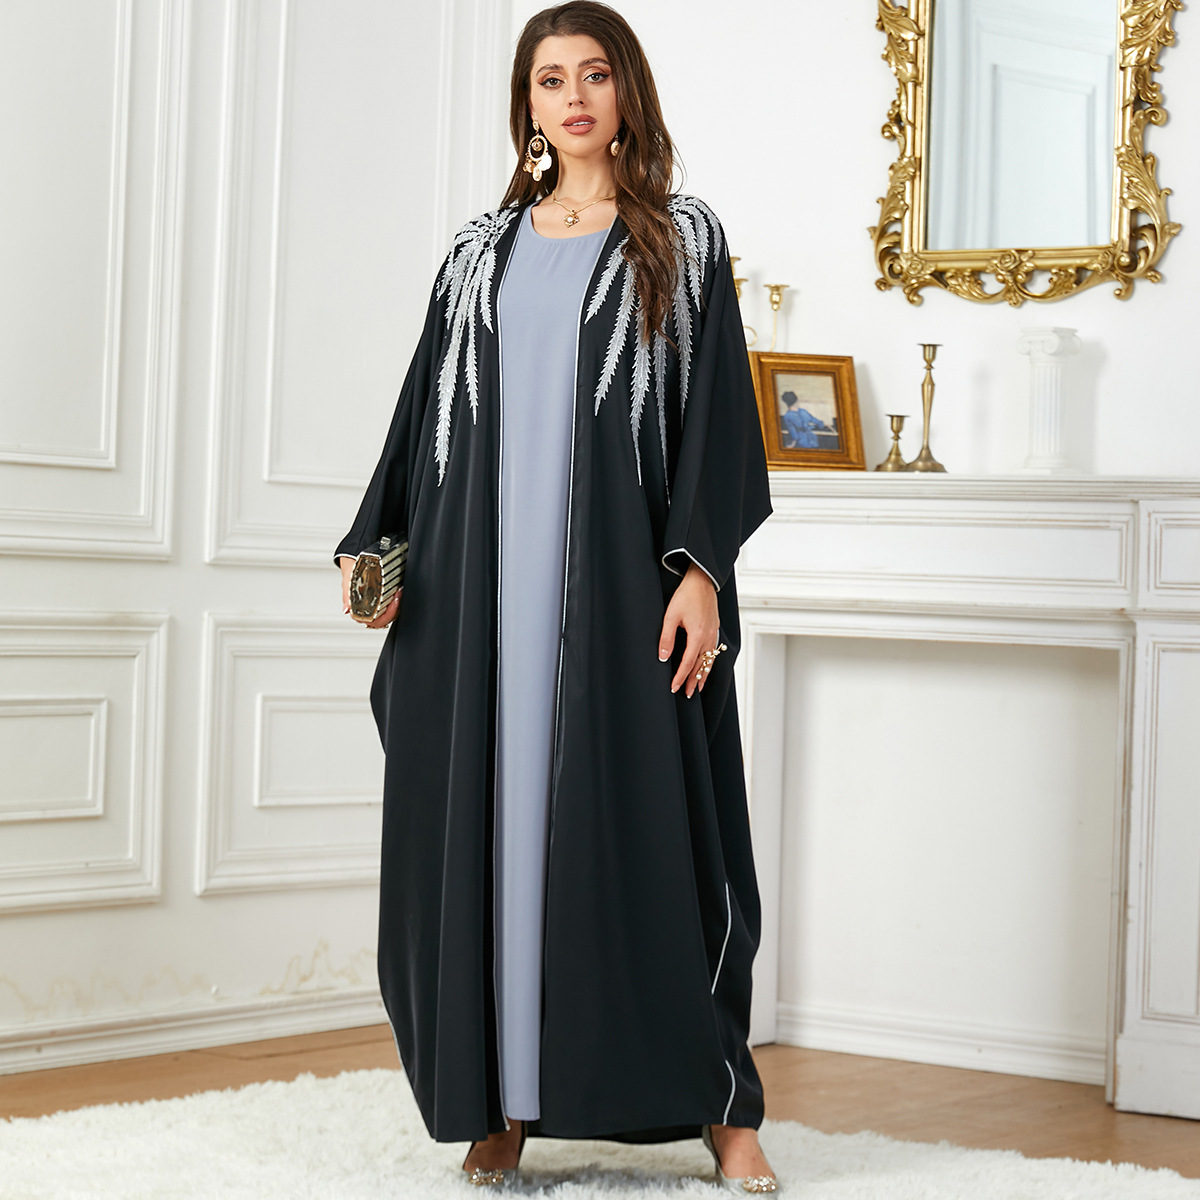 In-Stock Middle Eastern Women's Loose Long Robe Two-Piece Set with Batwing Sleeve Cardigan